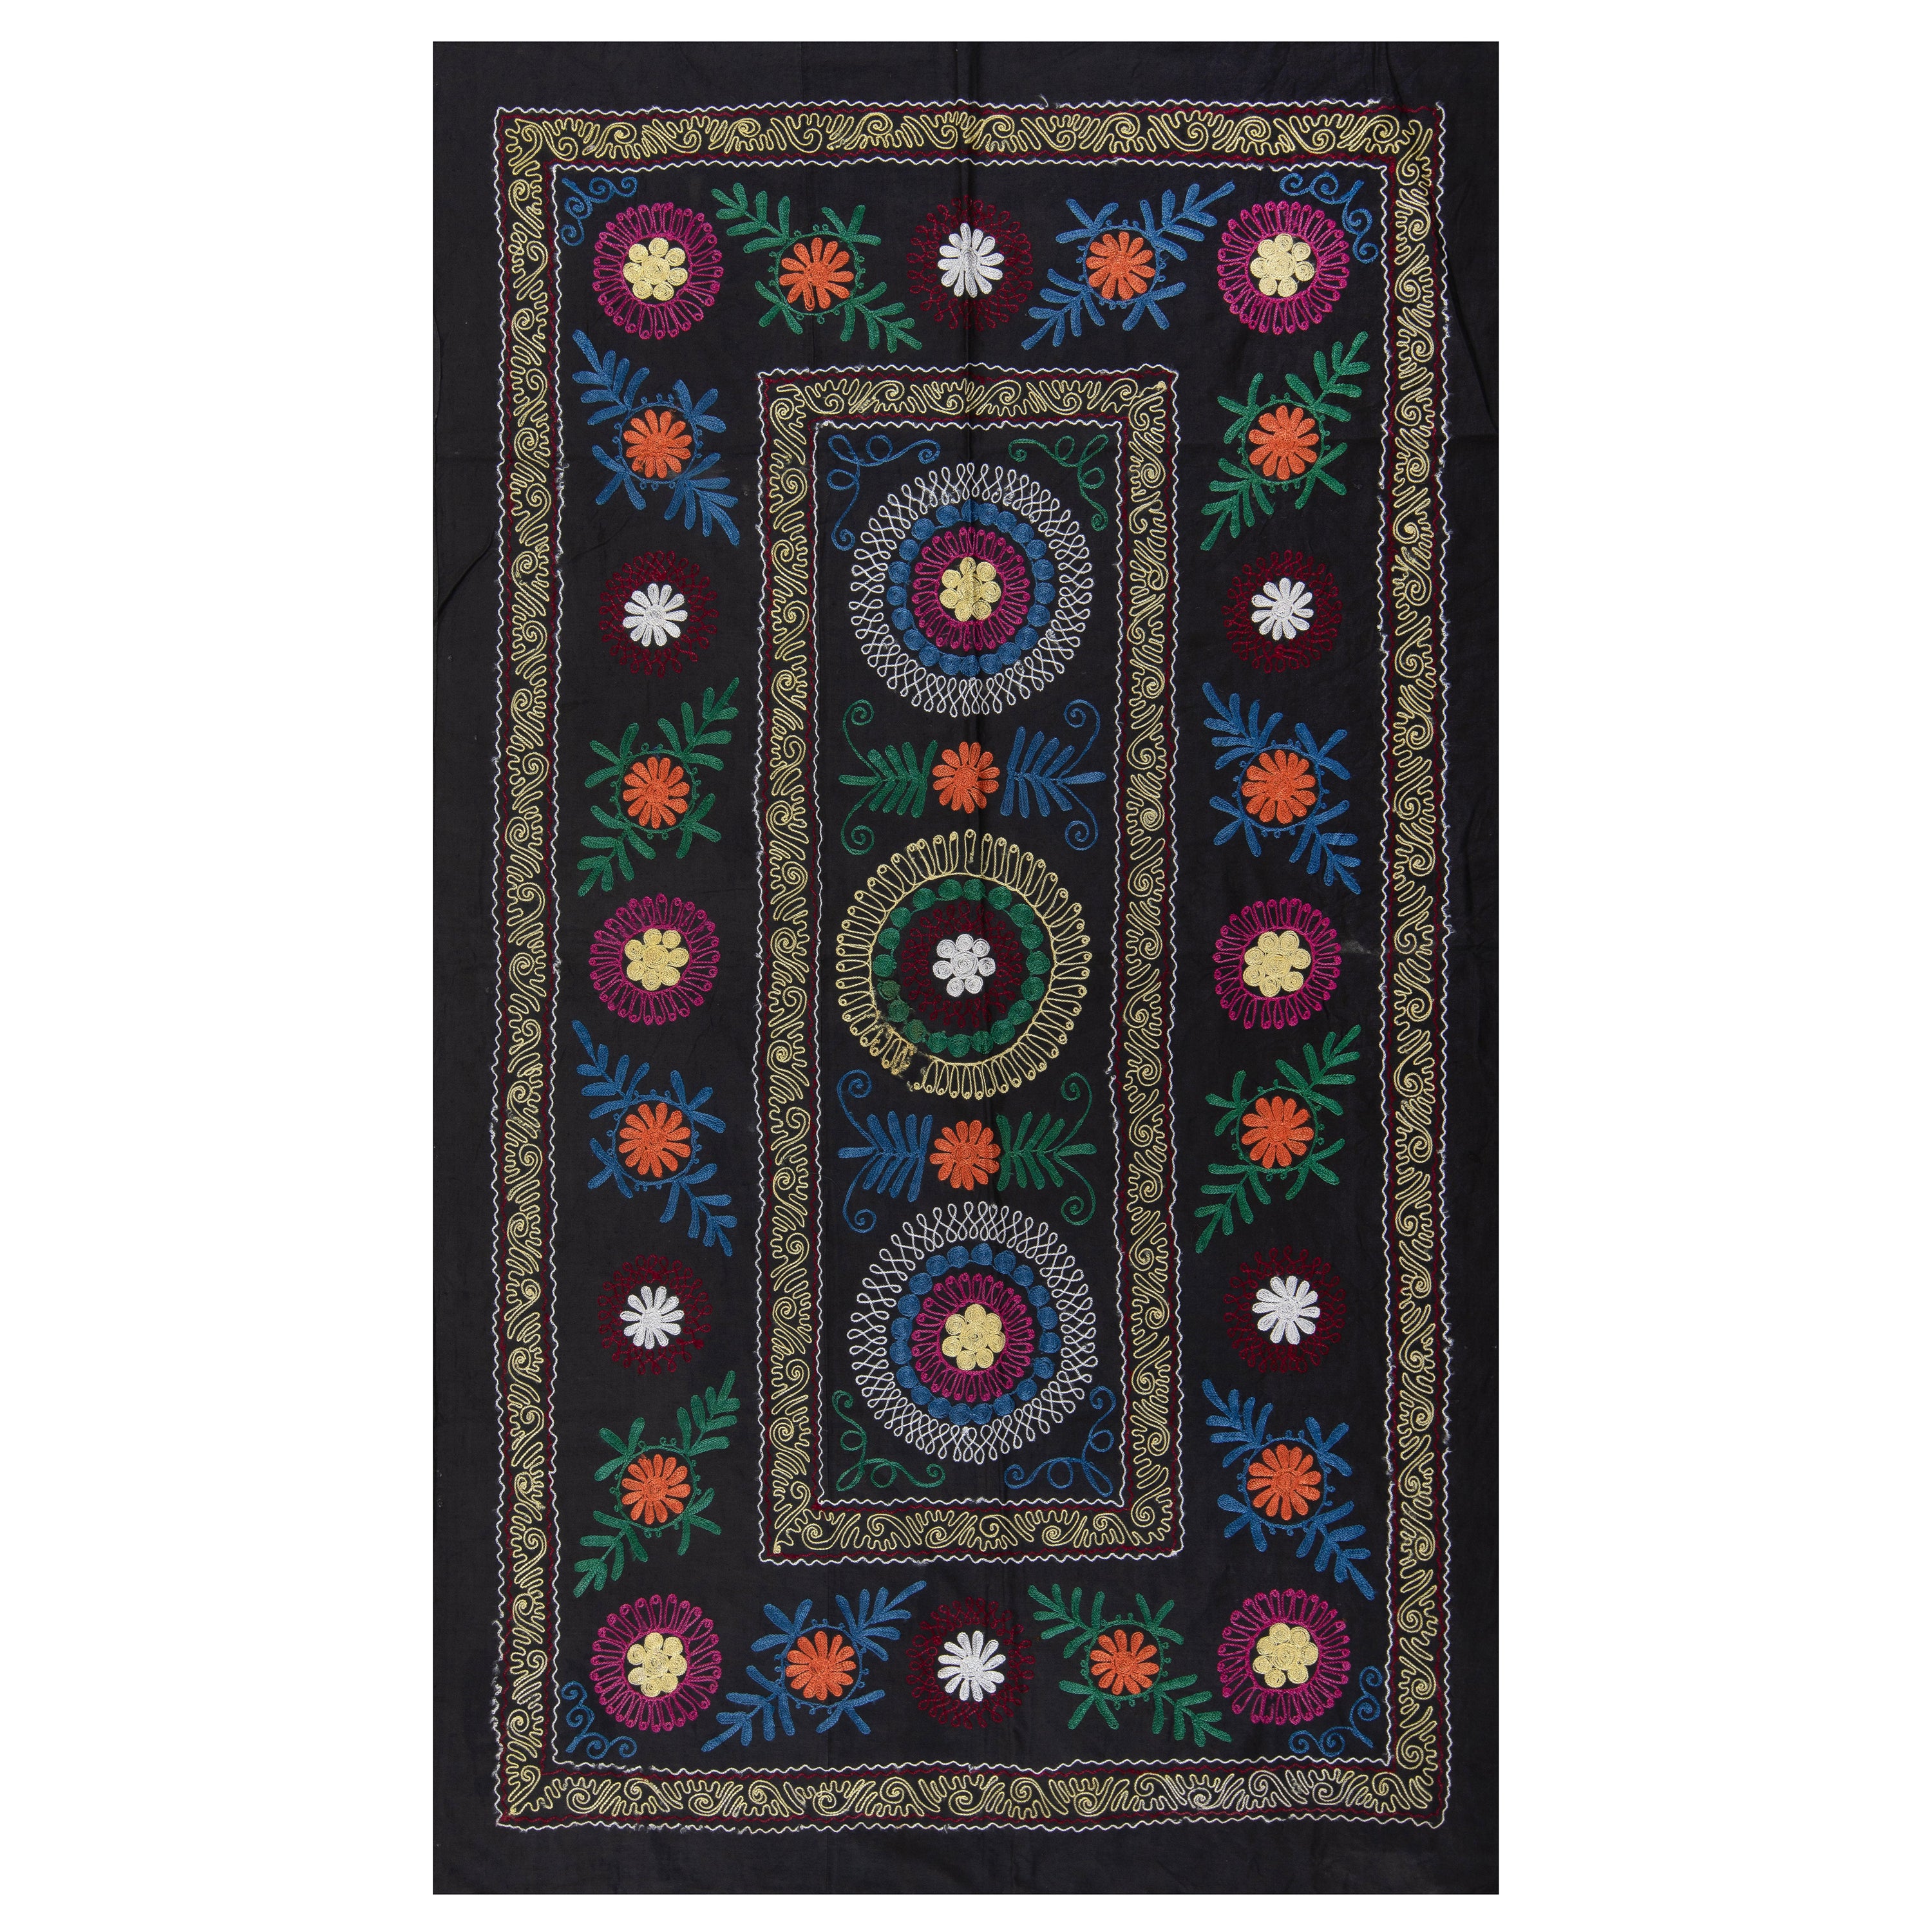 3.7x6.3 Ft Uzbek Suzani Wall Hanging in Black, Vintage Silk Embroidery Bedspread For Sale